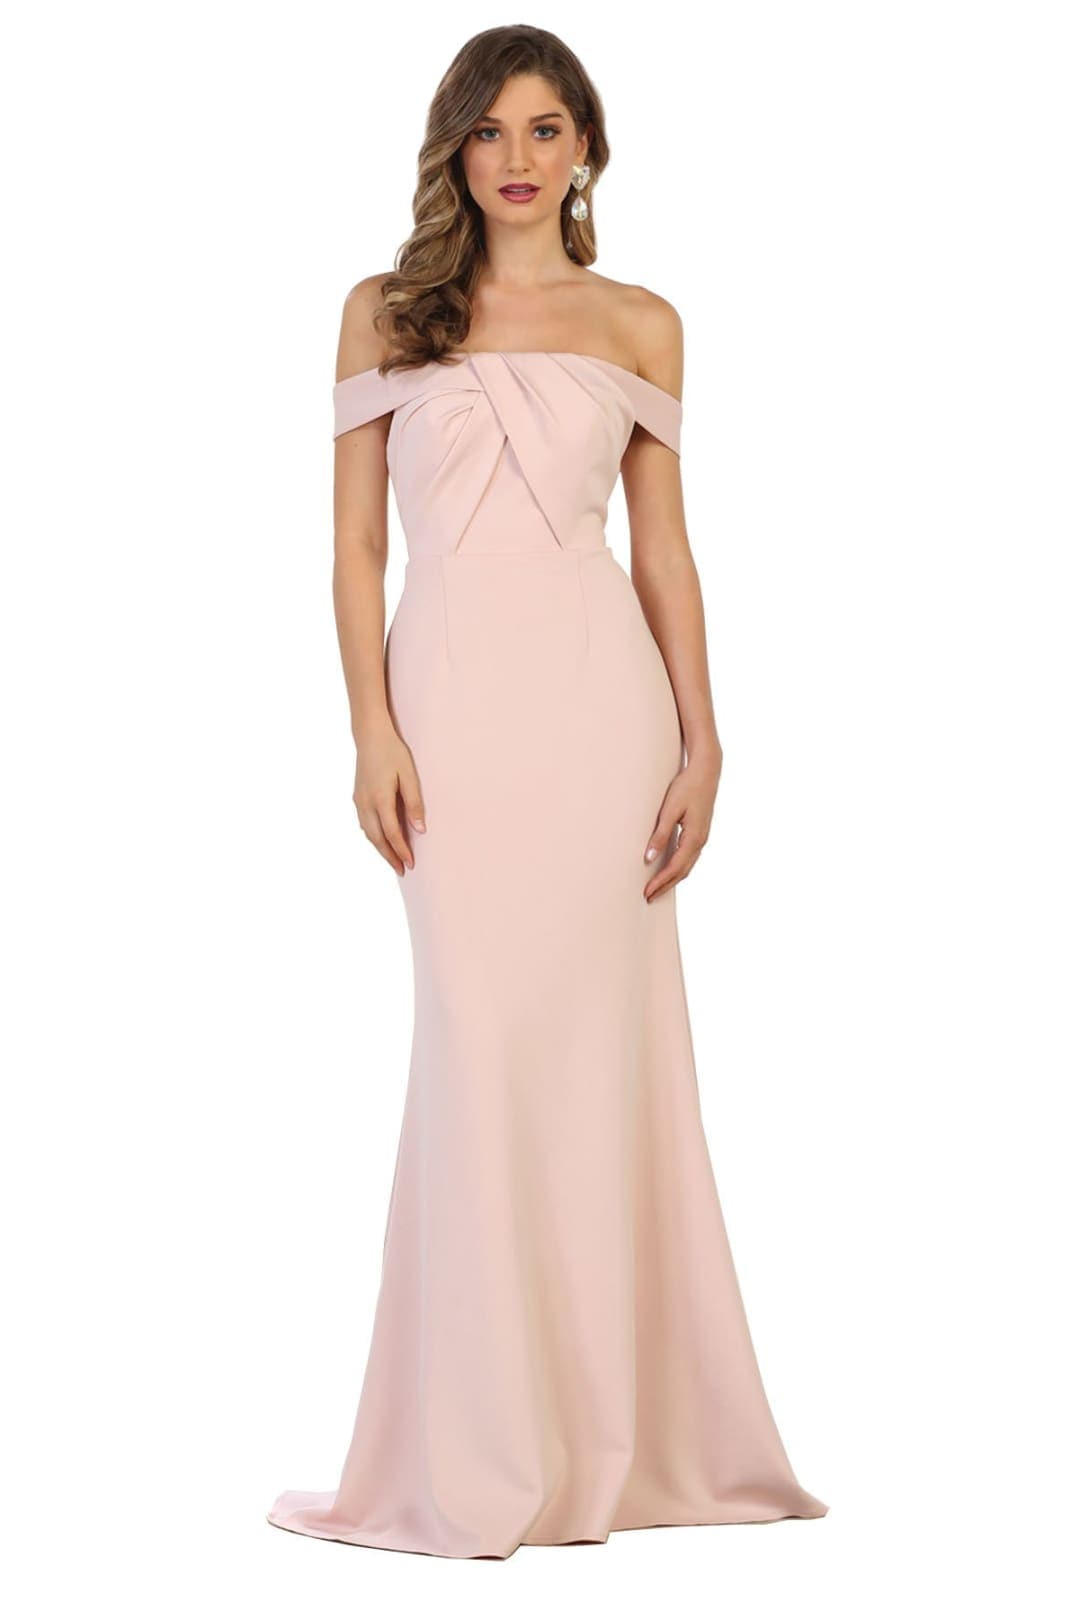 Sale! Simple Evening Gown